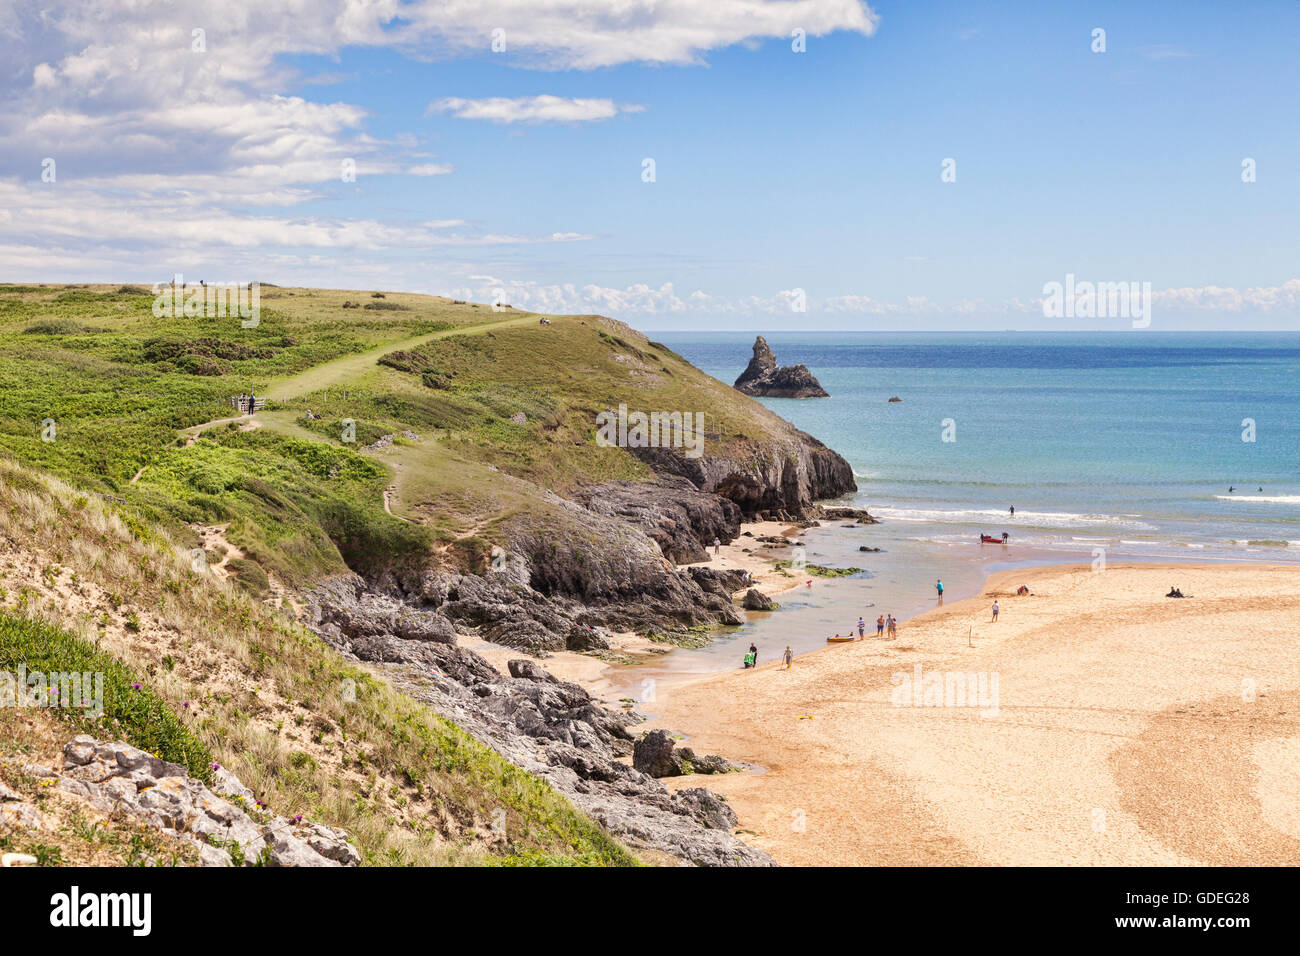 The beach at Broadhaven South, on the Stackpole Estate, Pembrokeshire Coast  National Park, Wales, UK Stock Photo